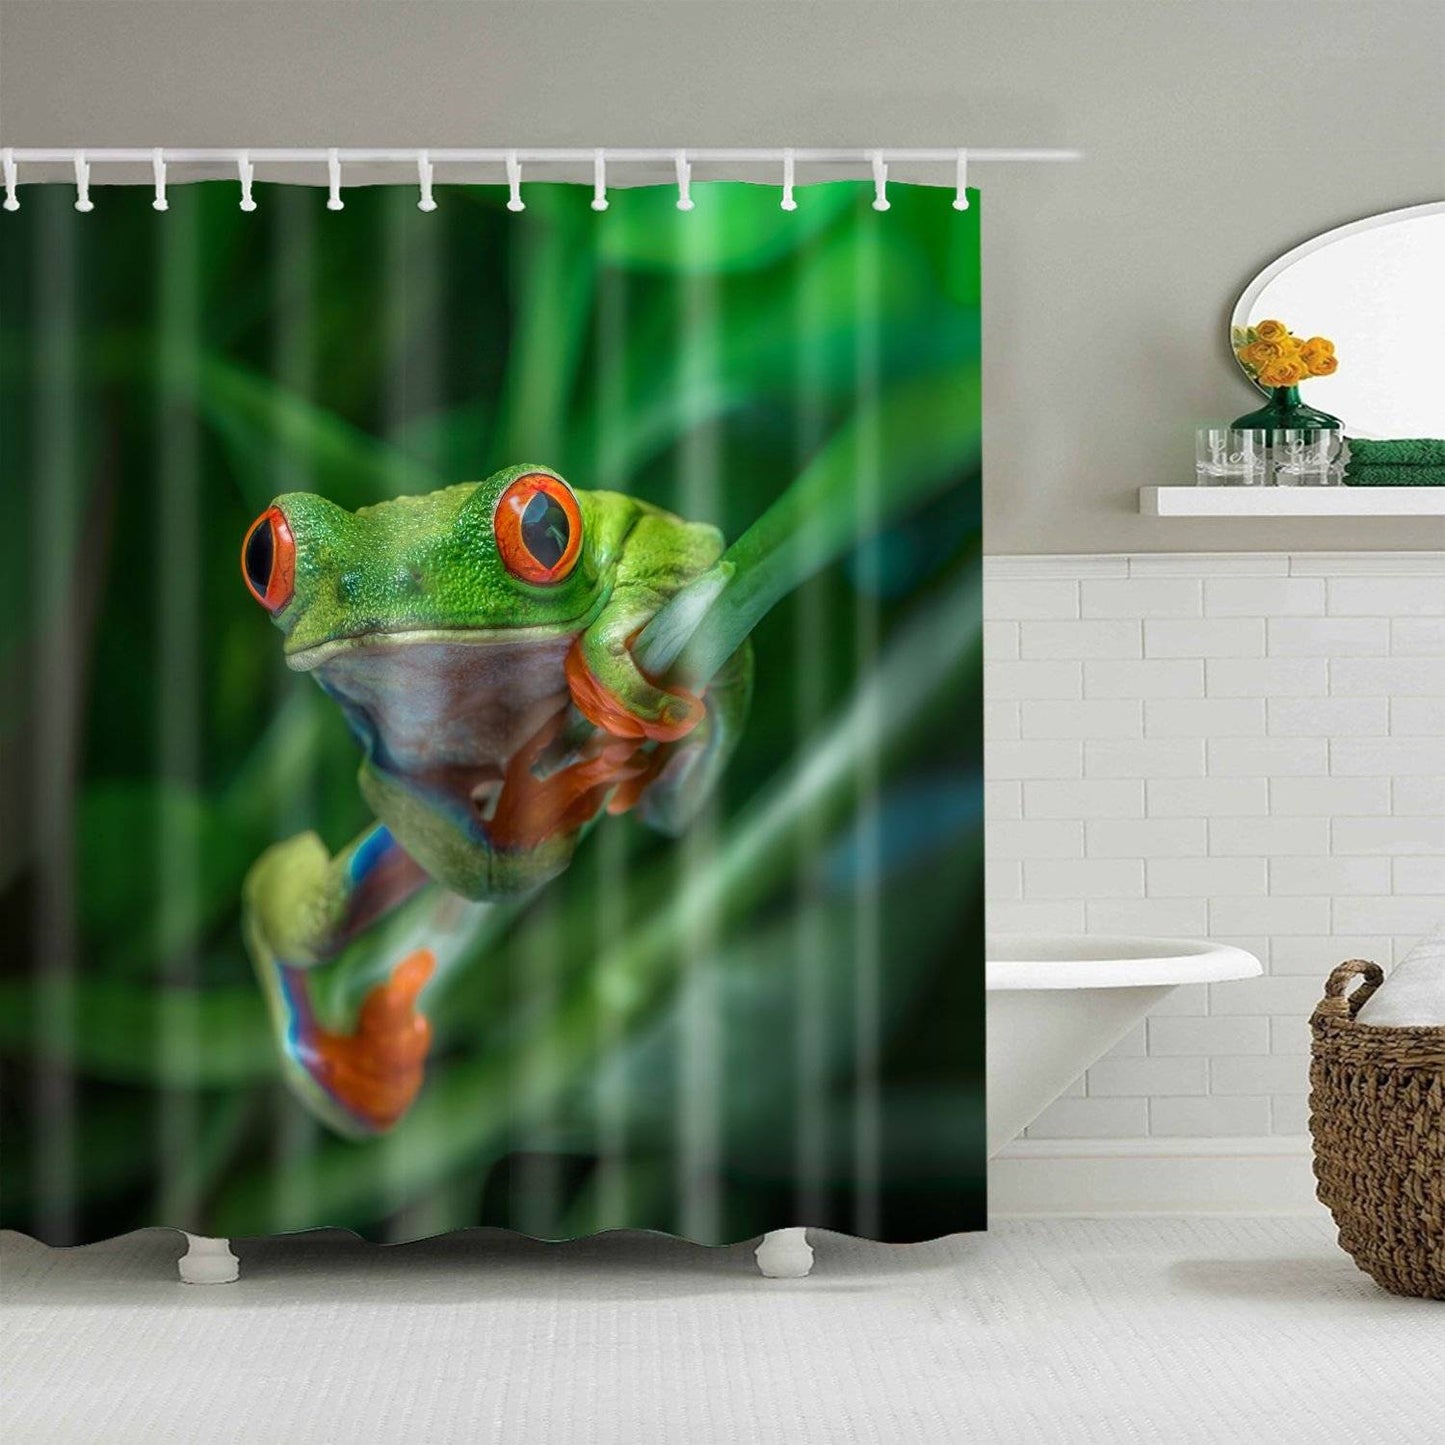 Tree Frog Shower Curtain Green Rainforest Leaves Red Eyed Frog